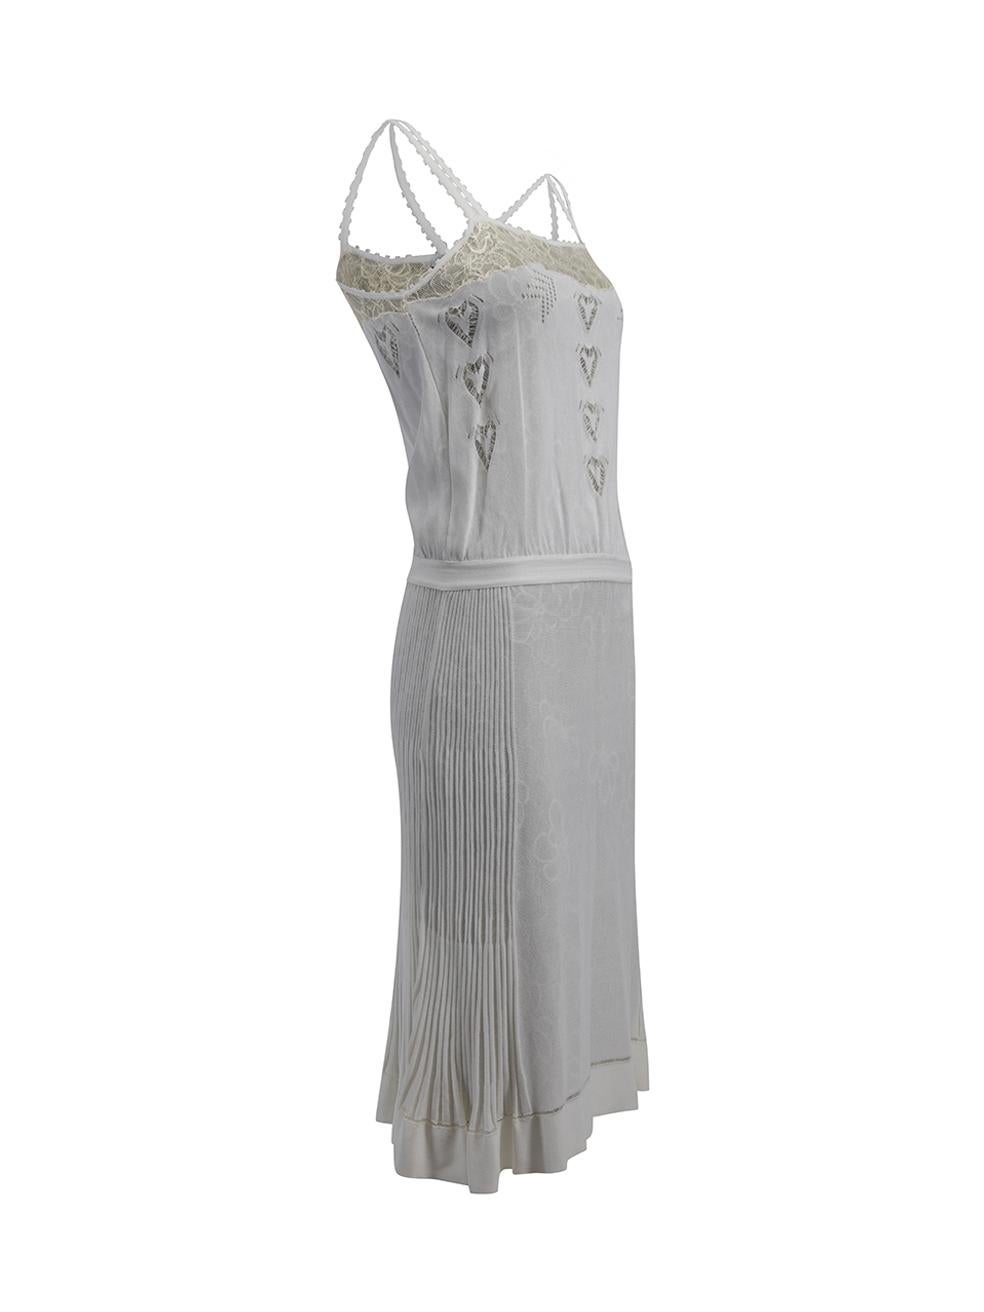 CONDITION is Very good. Hardly any visible wear to dress is evident on this used Chanel designer resale item.   Details  S/S 2006 White and cream Midi dress Strappy Floral lace underlayer Heart shaped lace detail on bodice Pleats on skirt Side